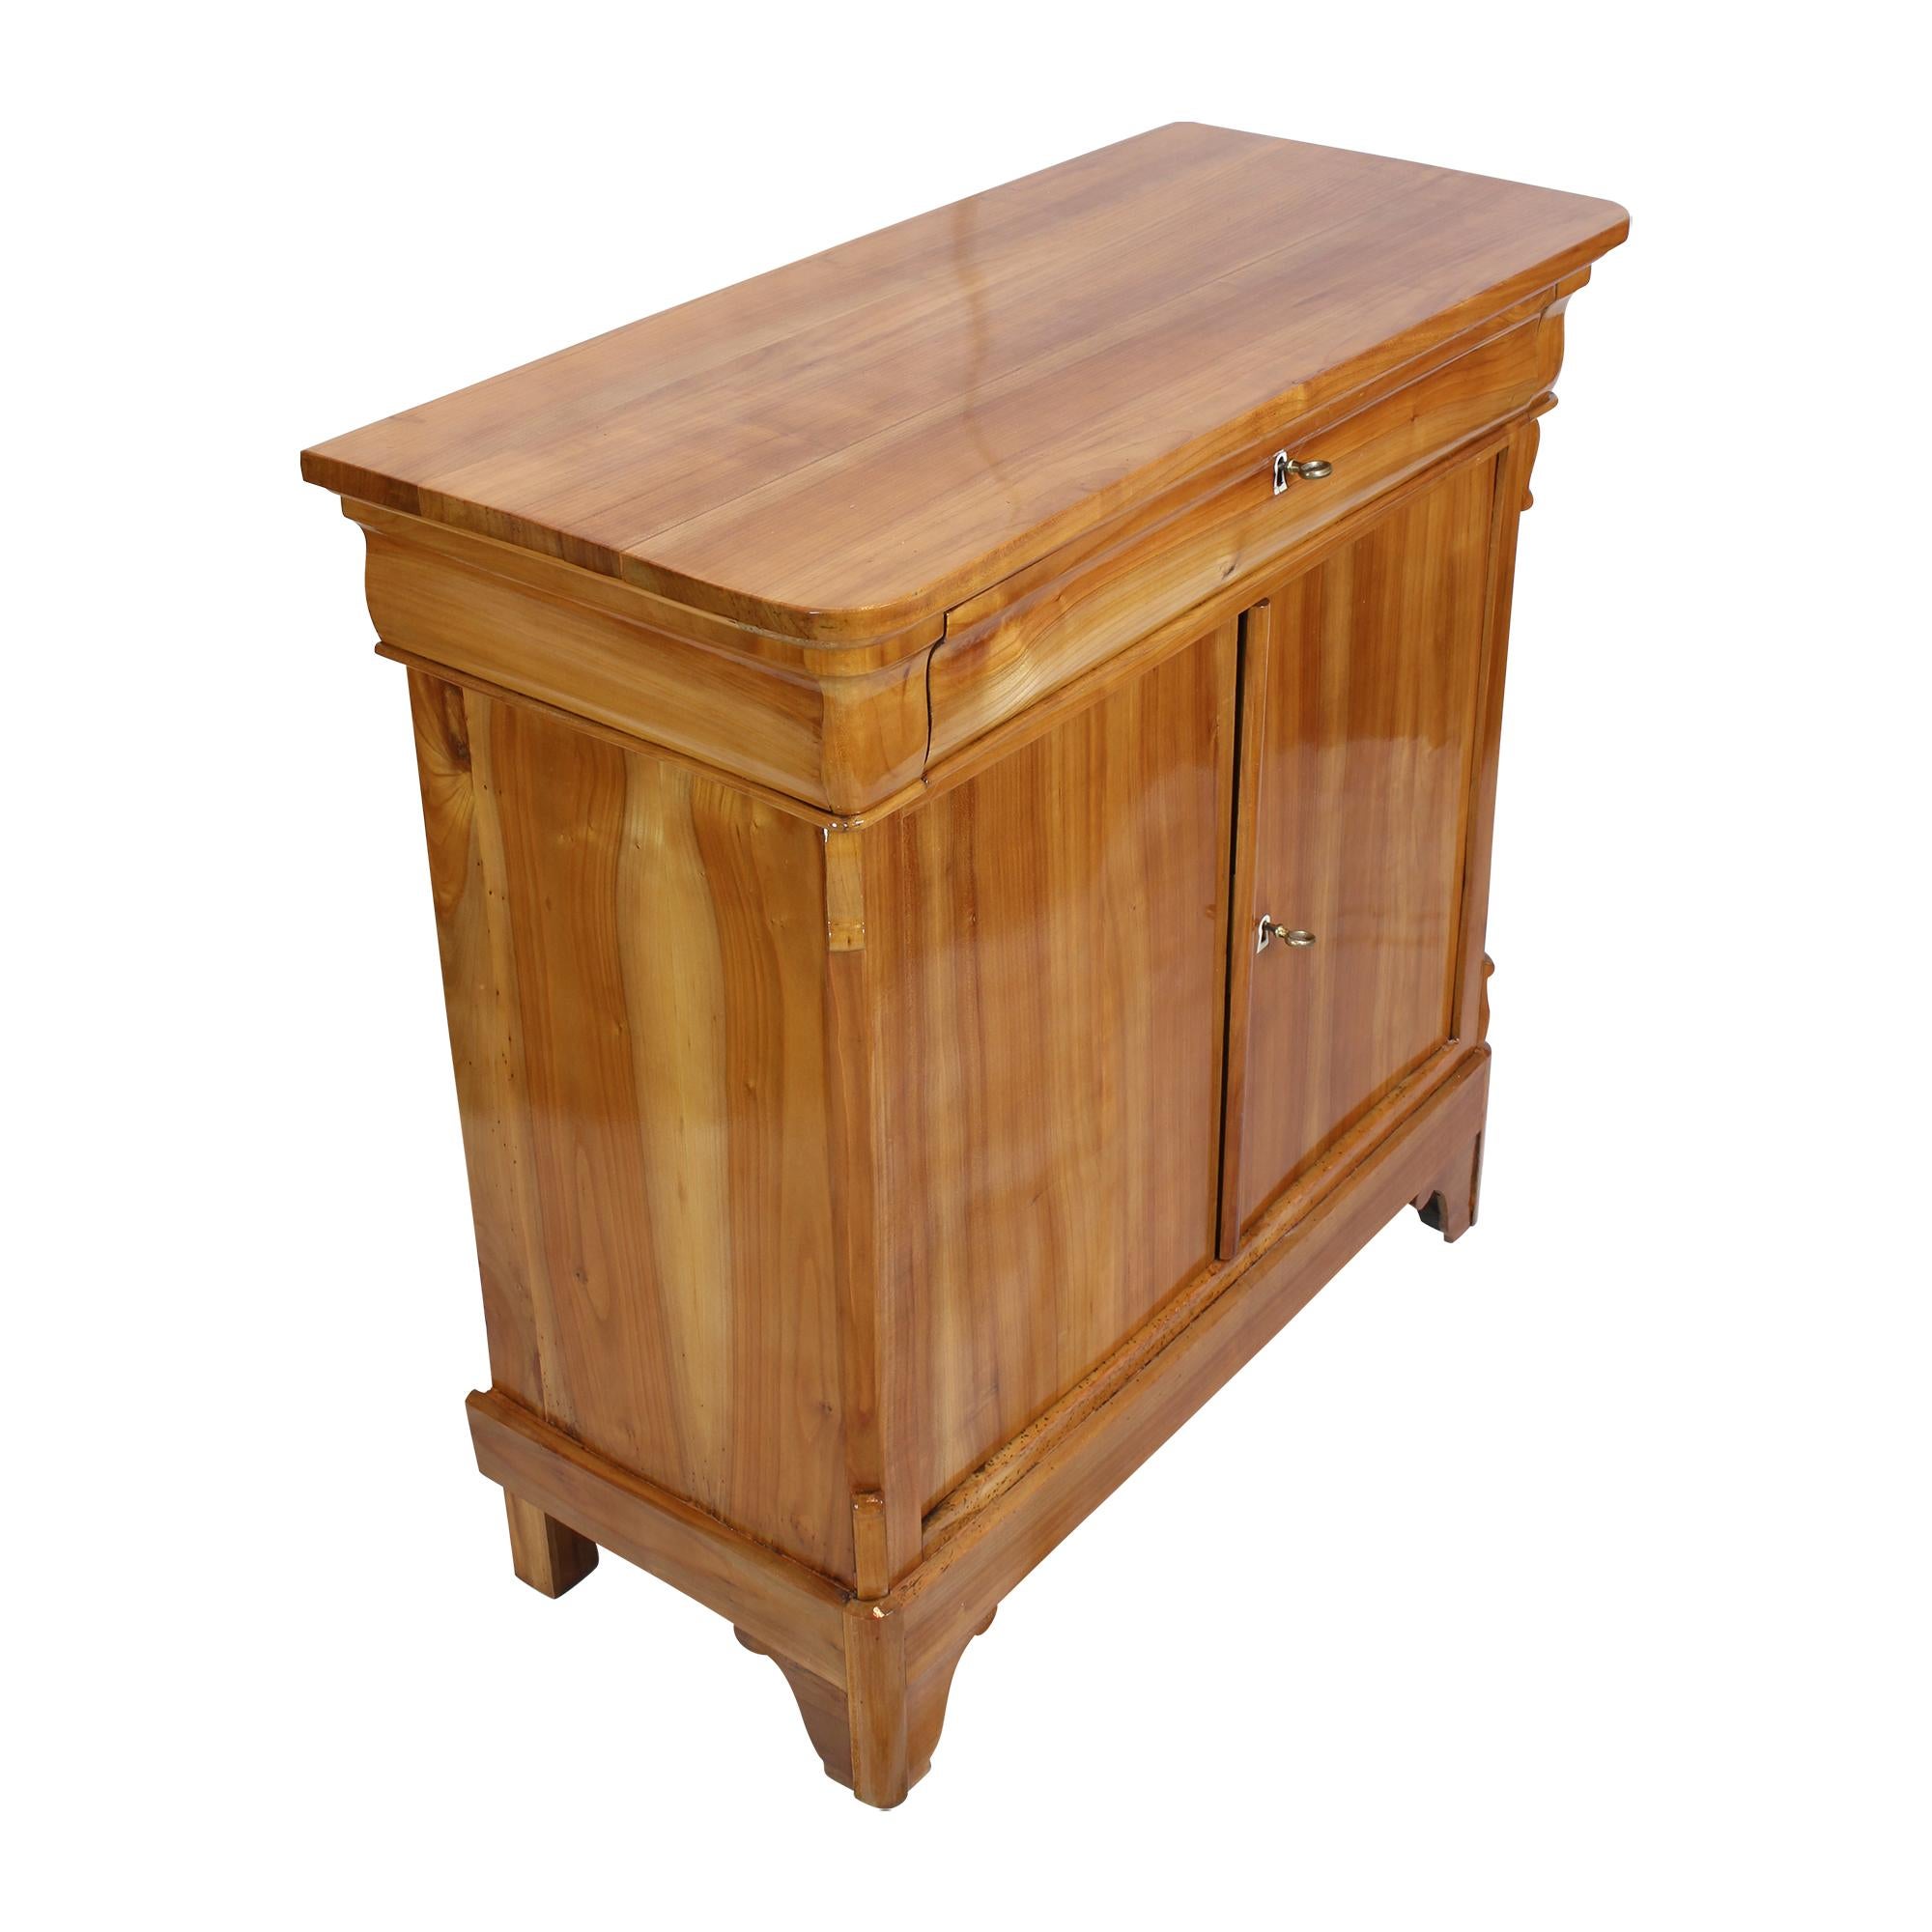 Beautiful and practical Biedermeier half cabinet made of solid cherry wood. The cabinet has a drawer at the top and 2 opening doors at the bottom. A brilliant piece of Biedermeier in very good quality.